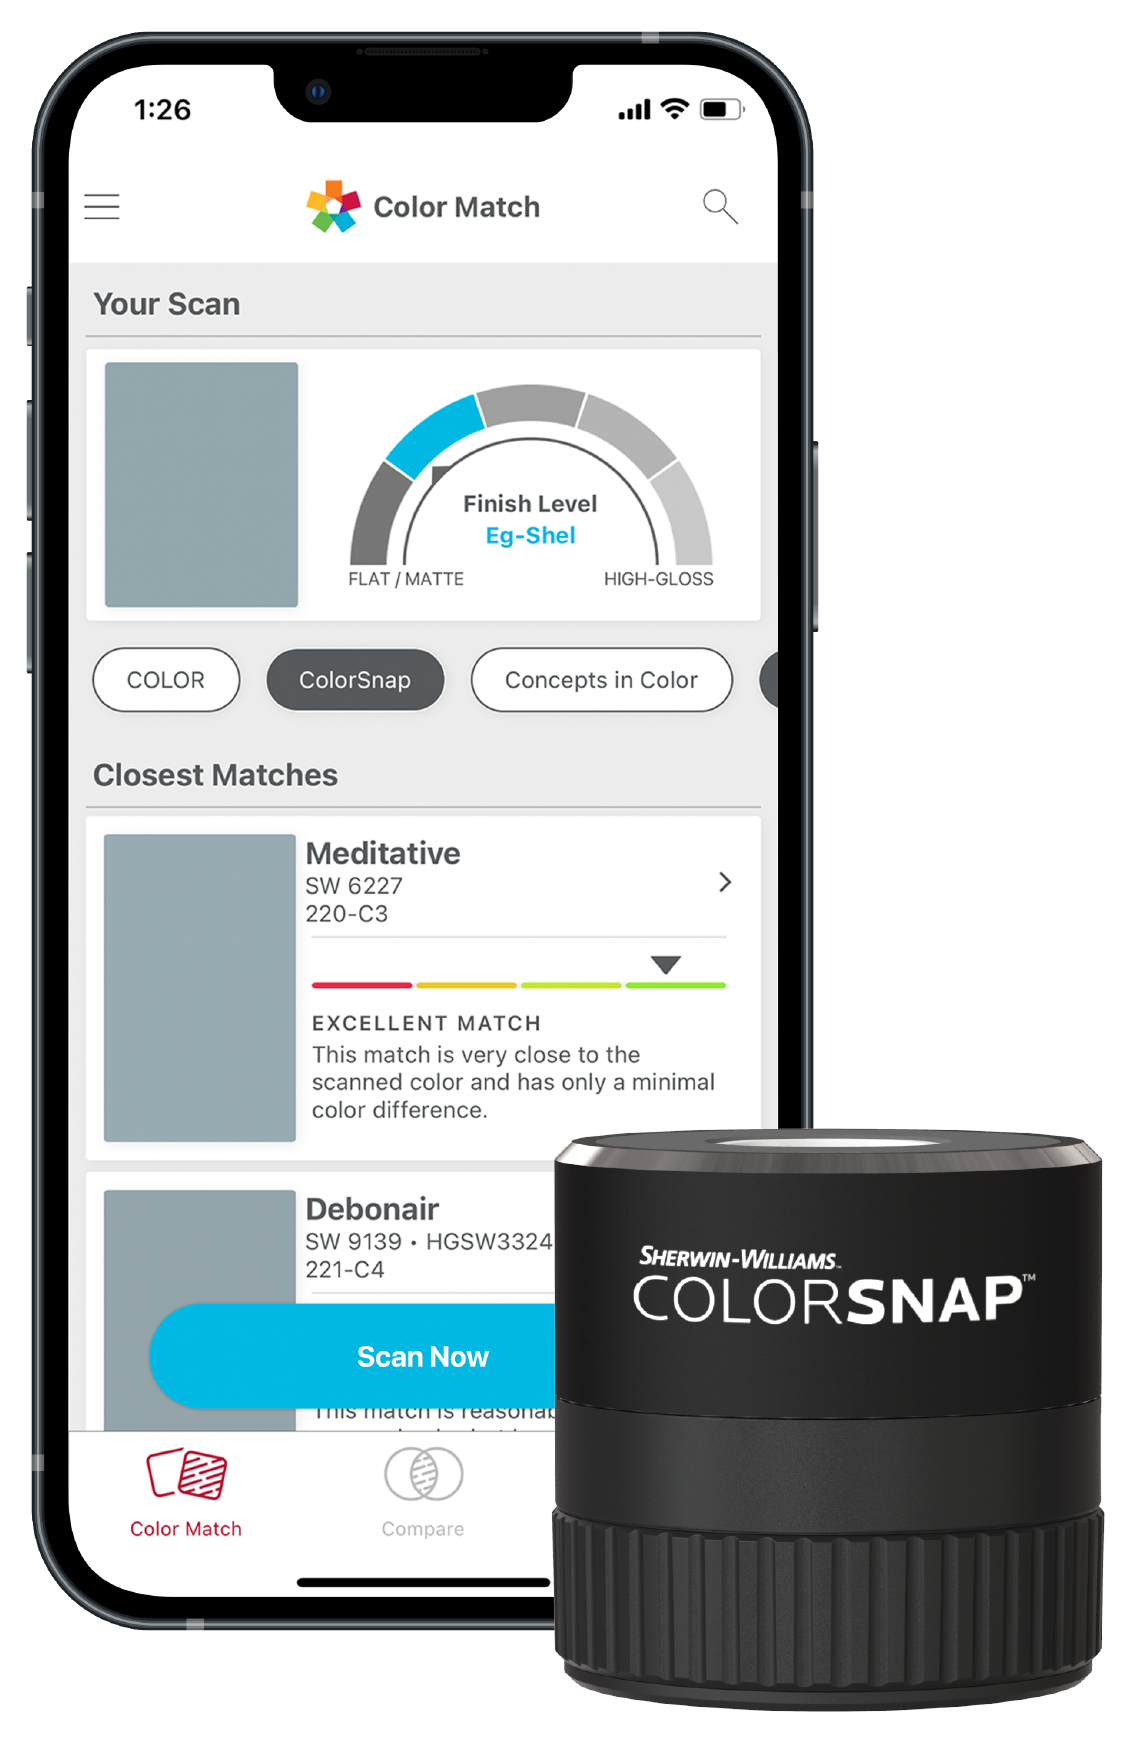 Color Muse 2 Colorimeter (New) - Color Matching Tool, Sheen Matching, Paint Scanner - Identify Closest Matching Paint Colors, Sheen Levels, Digital